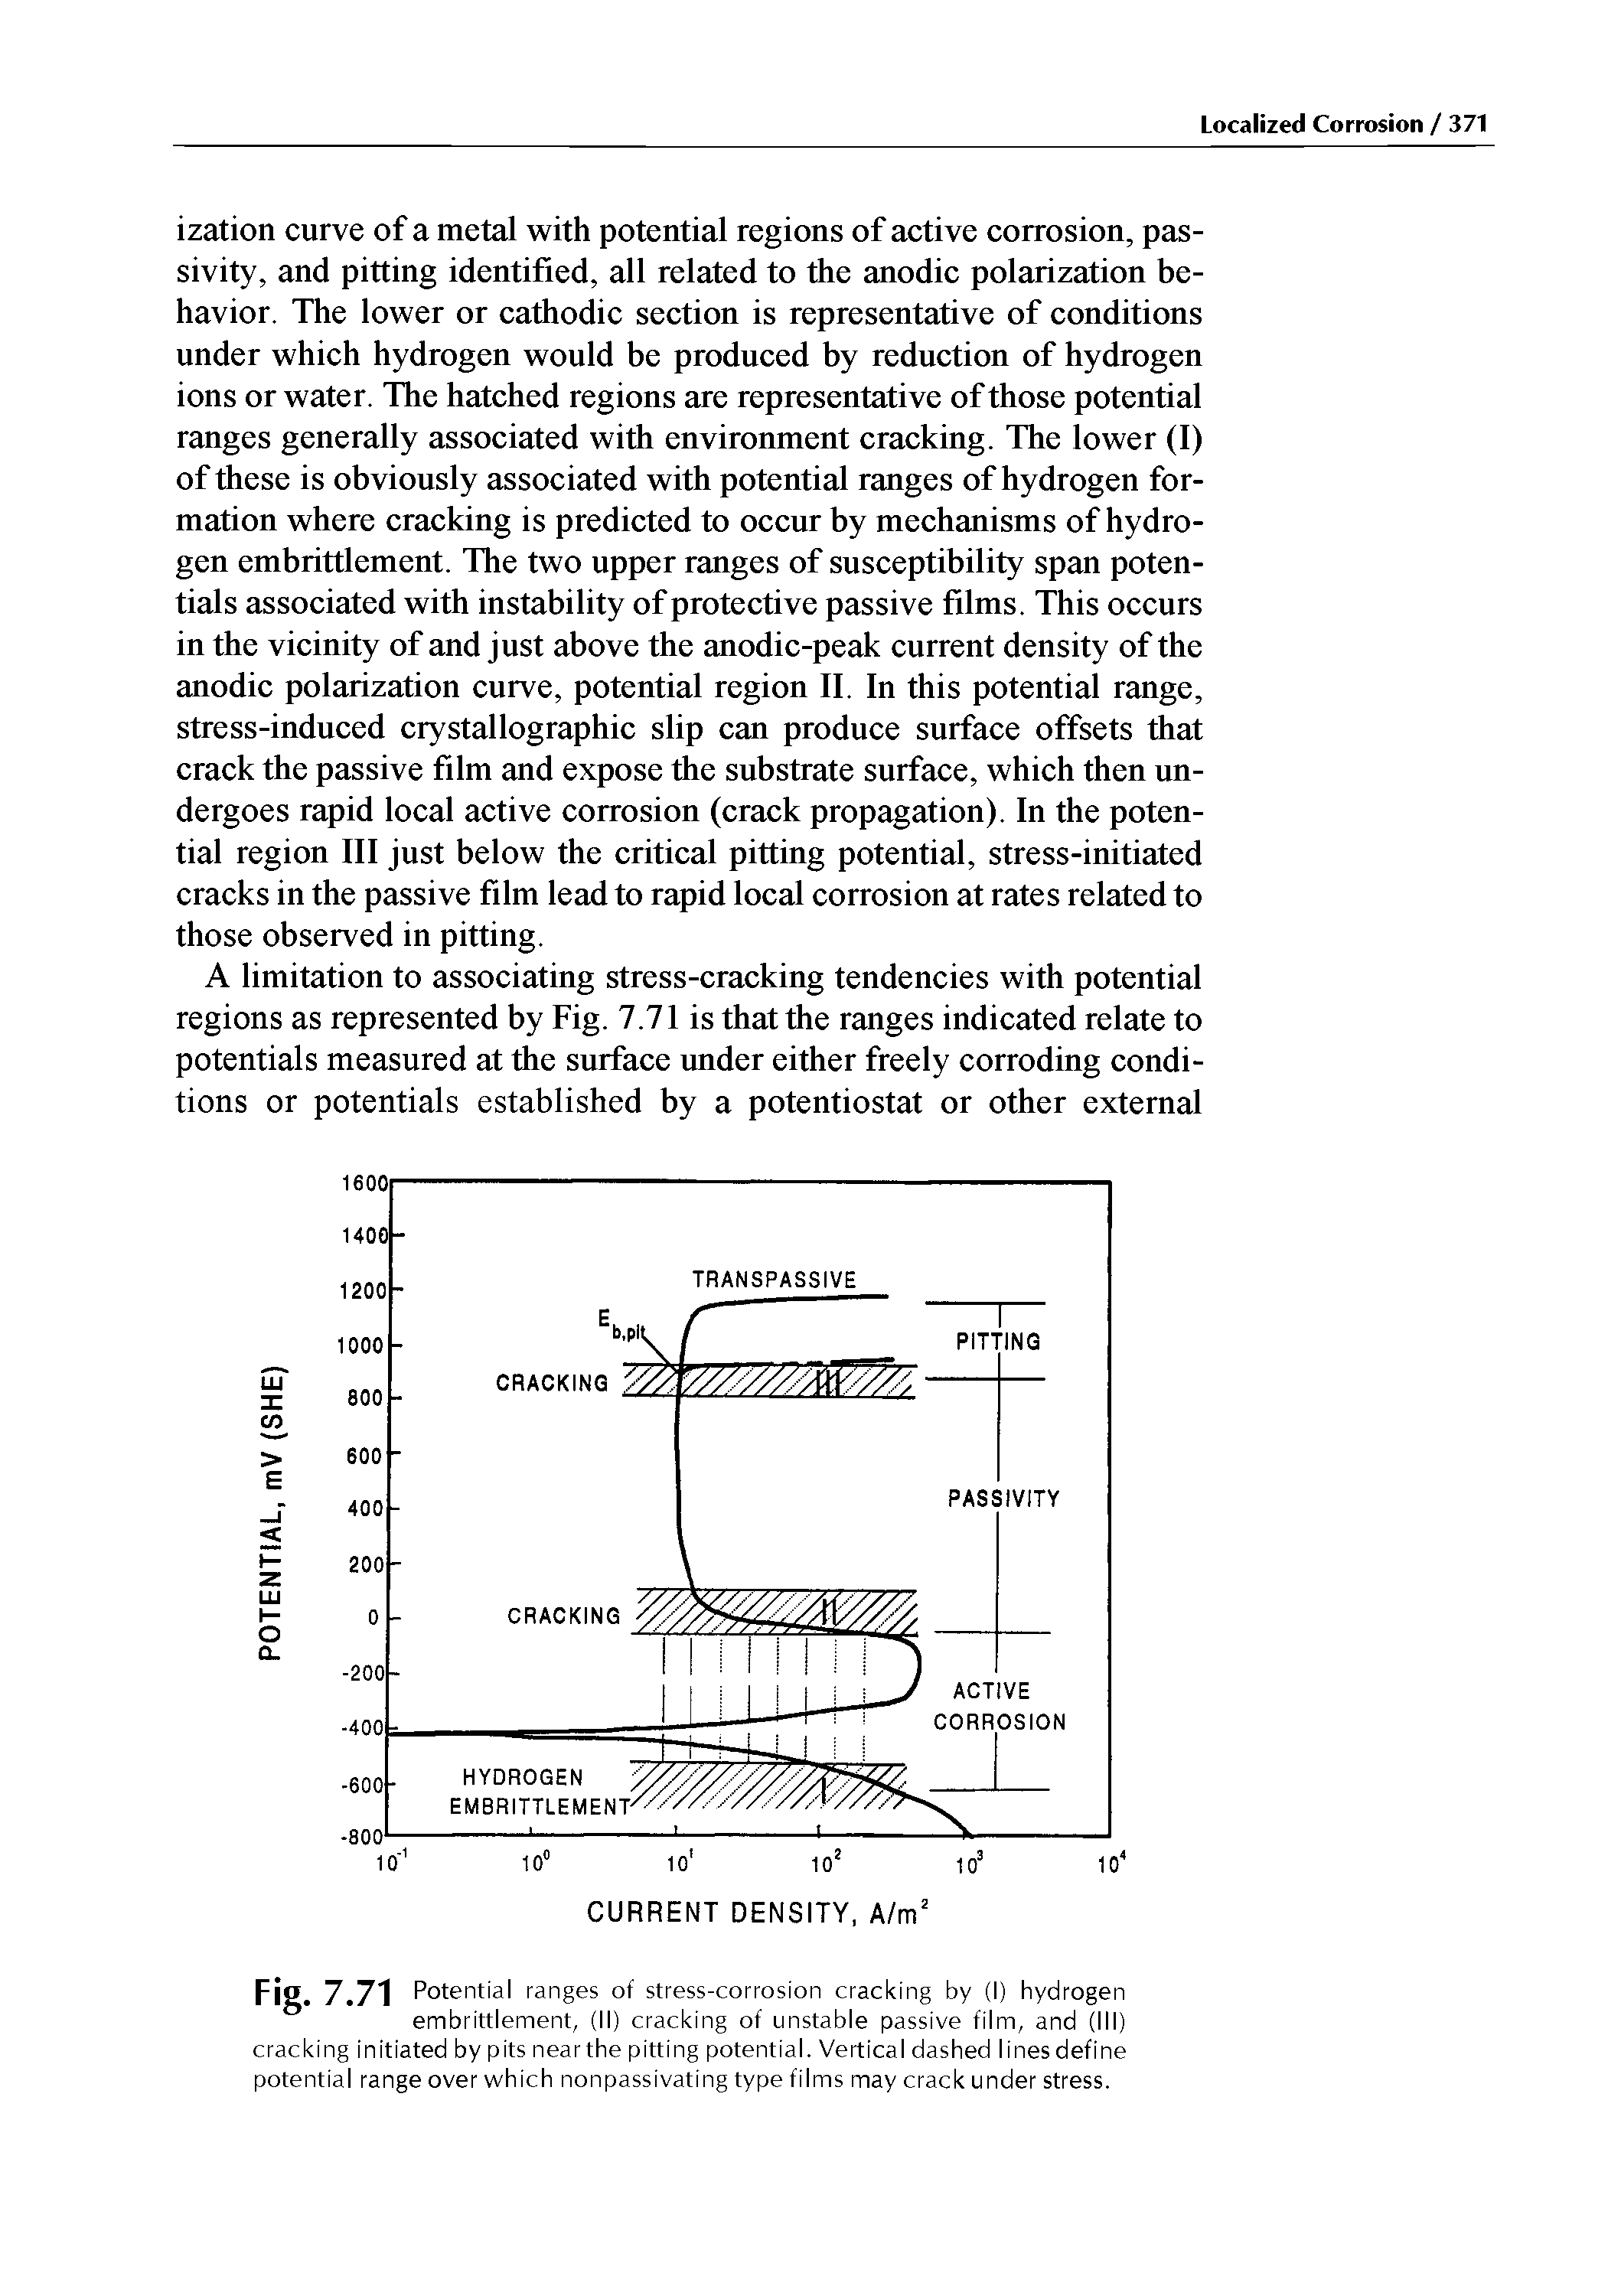 Fig. 7.71 Potential ranges of stress-corrosion cracking by (I) hydrogen embrittlement, (II) cracking of unstable passive film, and (III) cracking initiated by pits near the pitting potential. Vertical dashed lines define potential range over which nonpassivating type films may crack under stress.